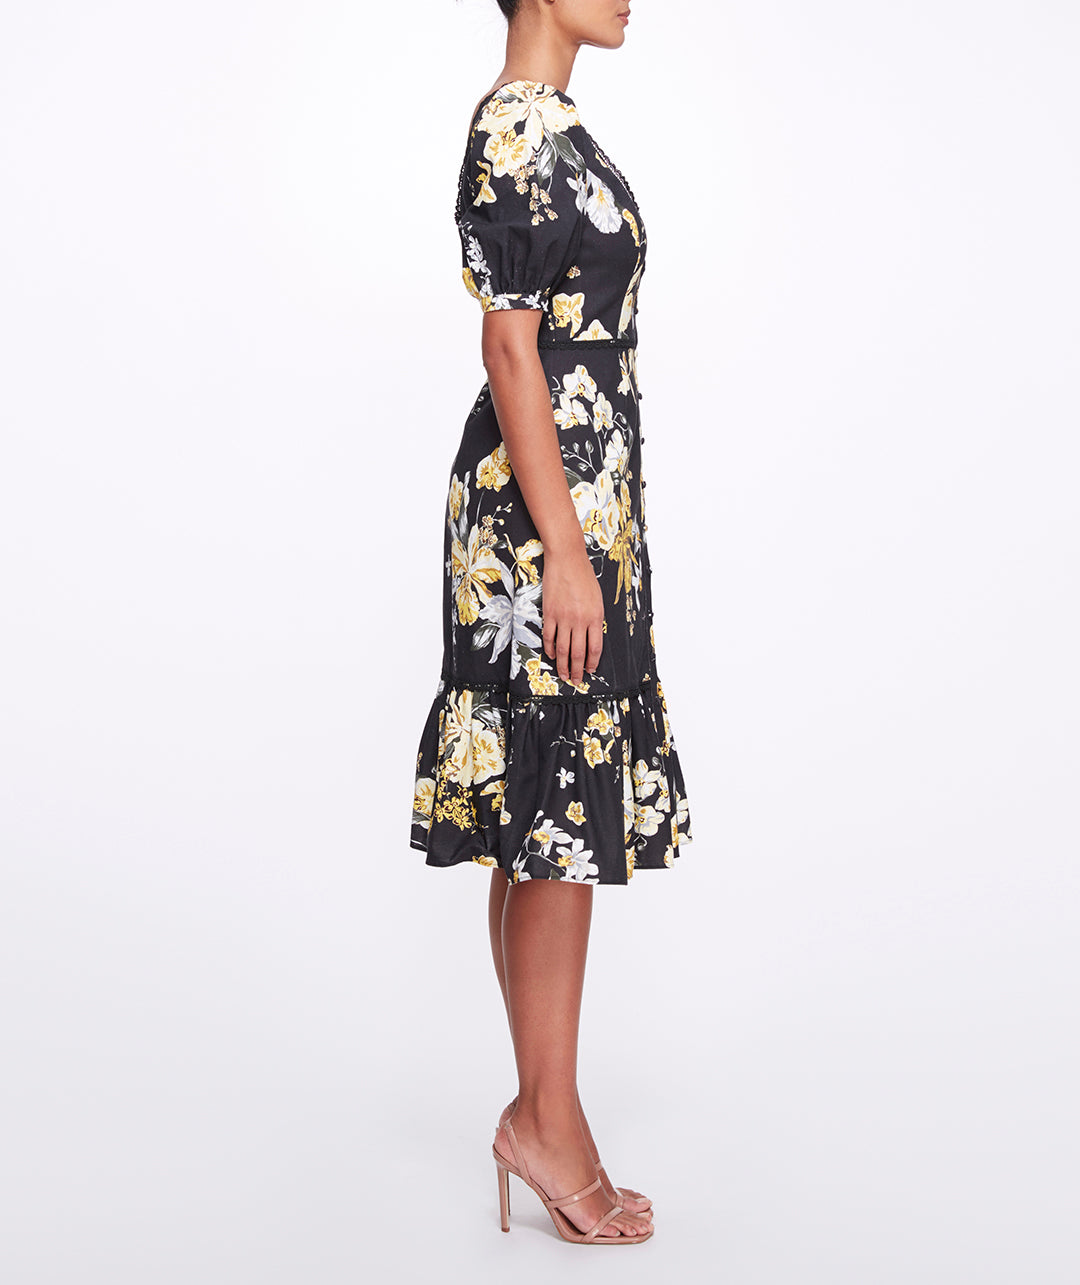 Sweetheart Neckline Floral Print Fitted Midi Dress Marchesa